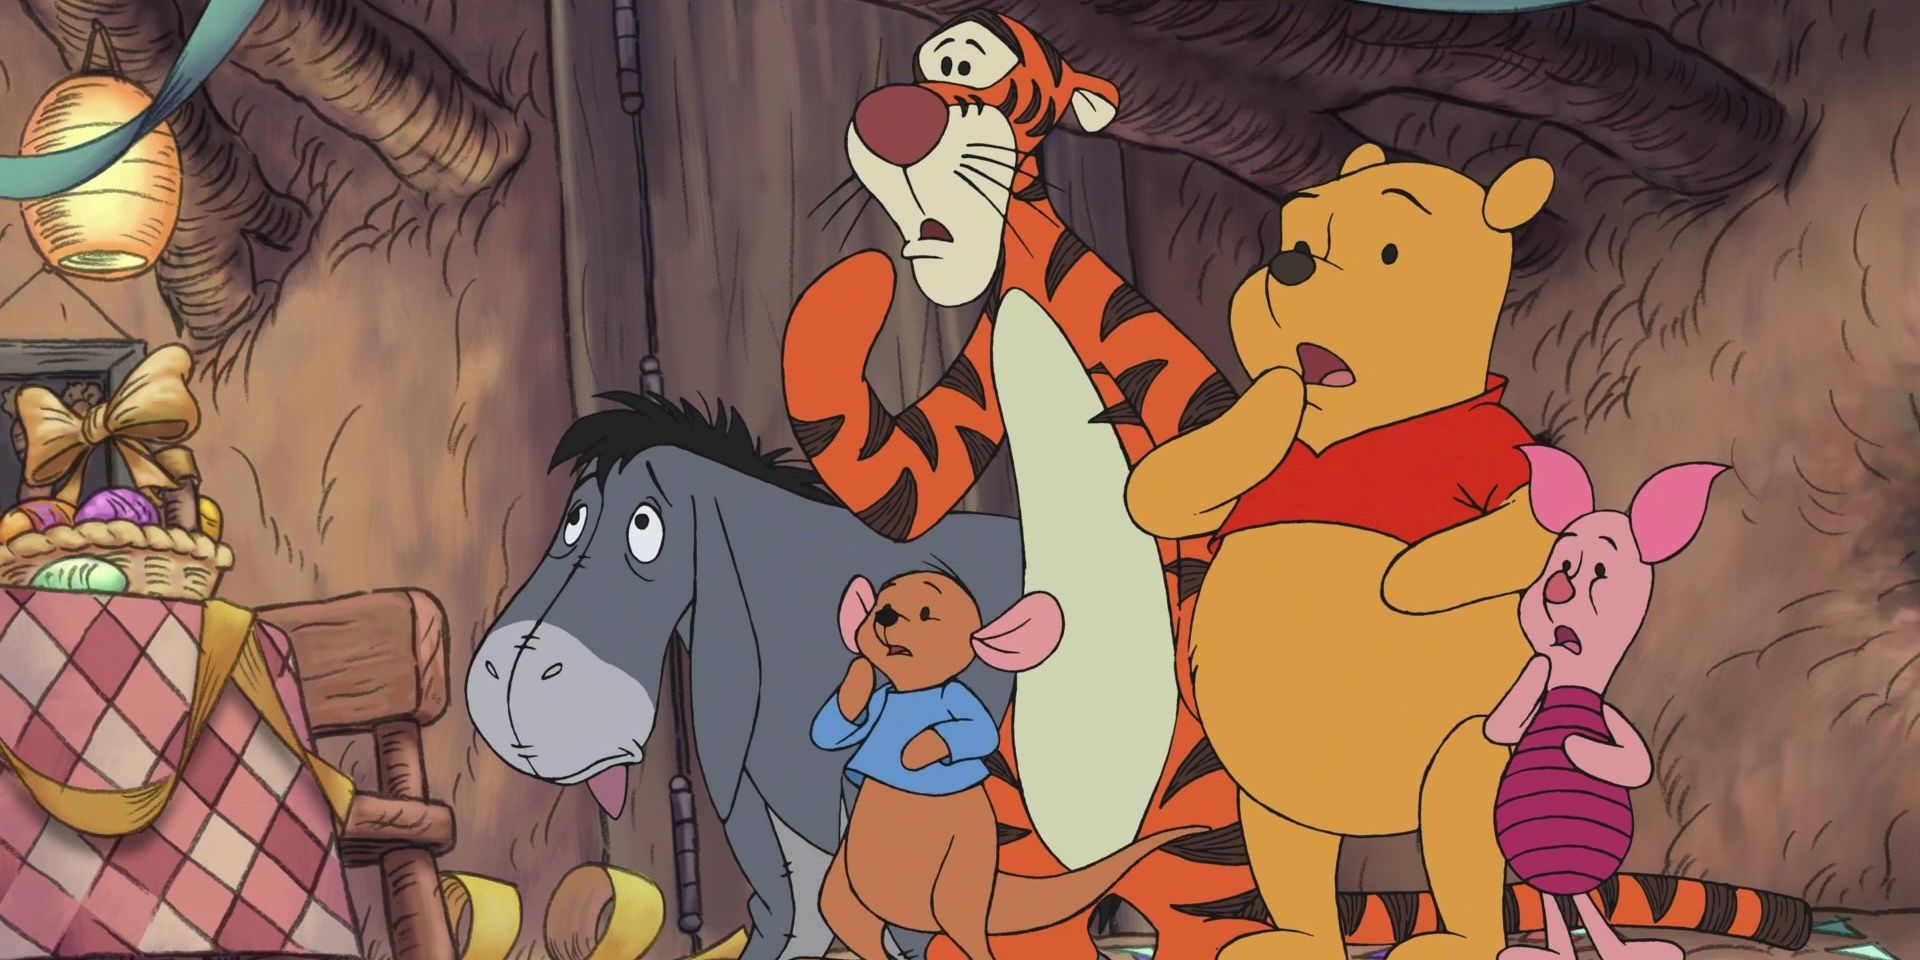 Characters in Pooh's Springtime with Roo